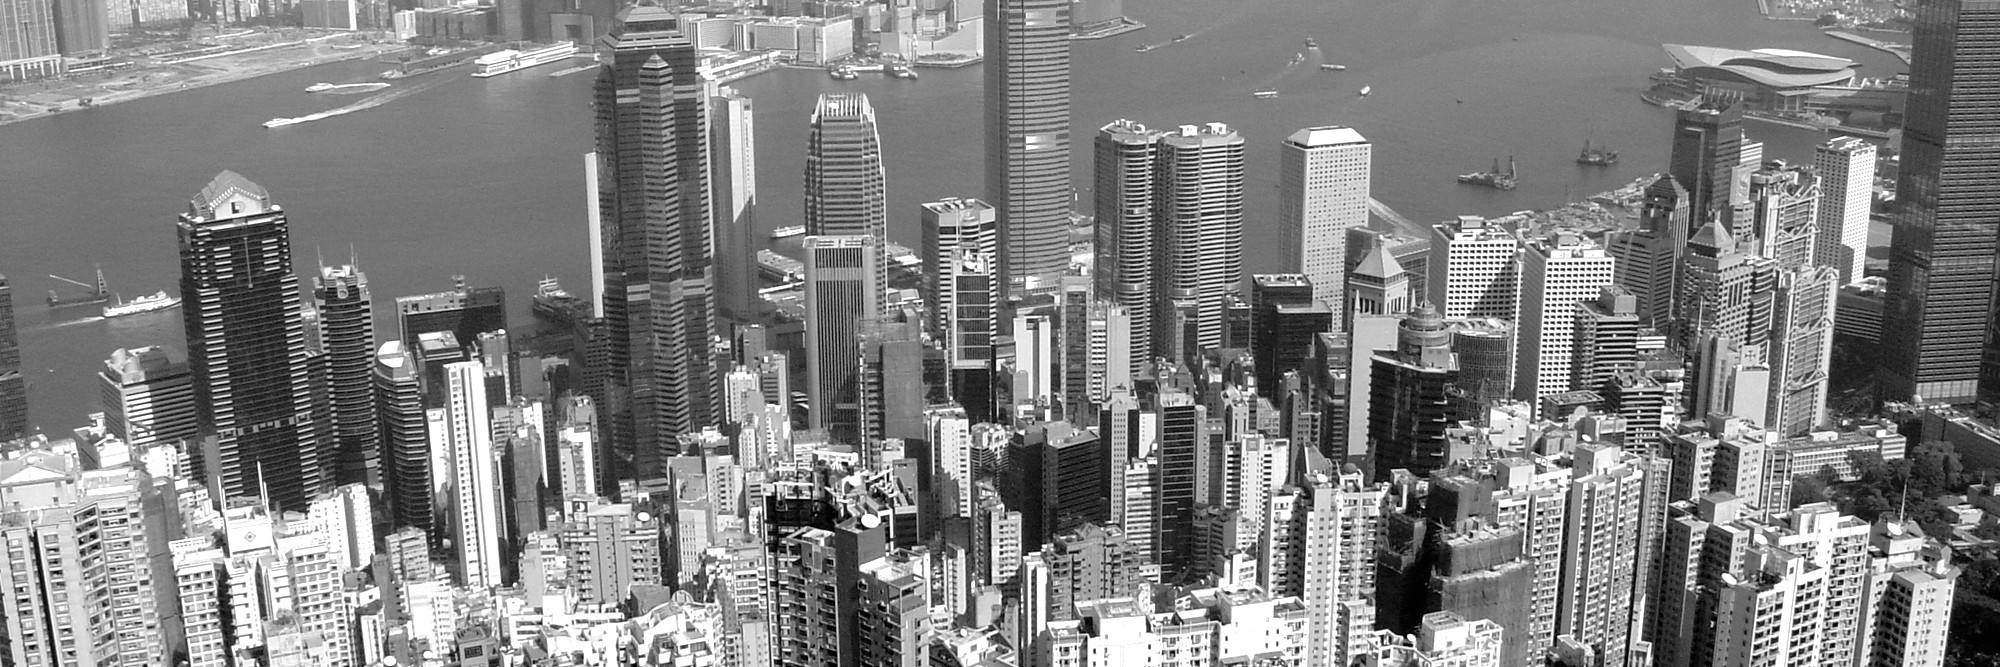 Joint Consultation Conclusions on Proposed Changes to Hong Kong Listing Regulation Released